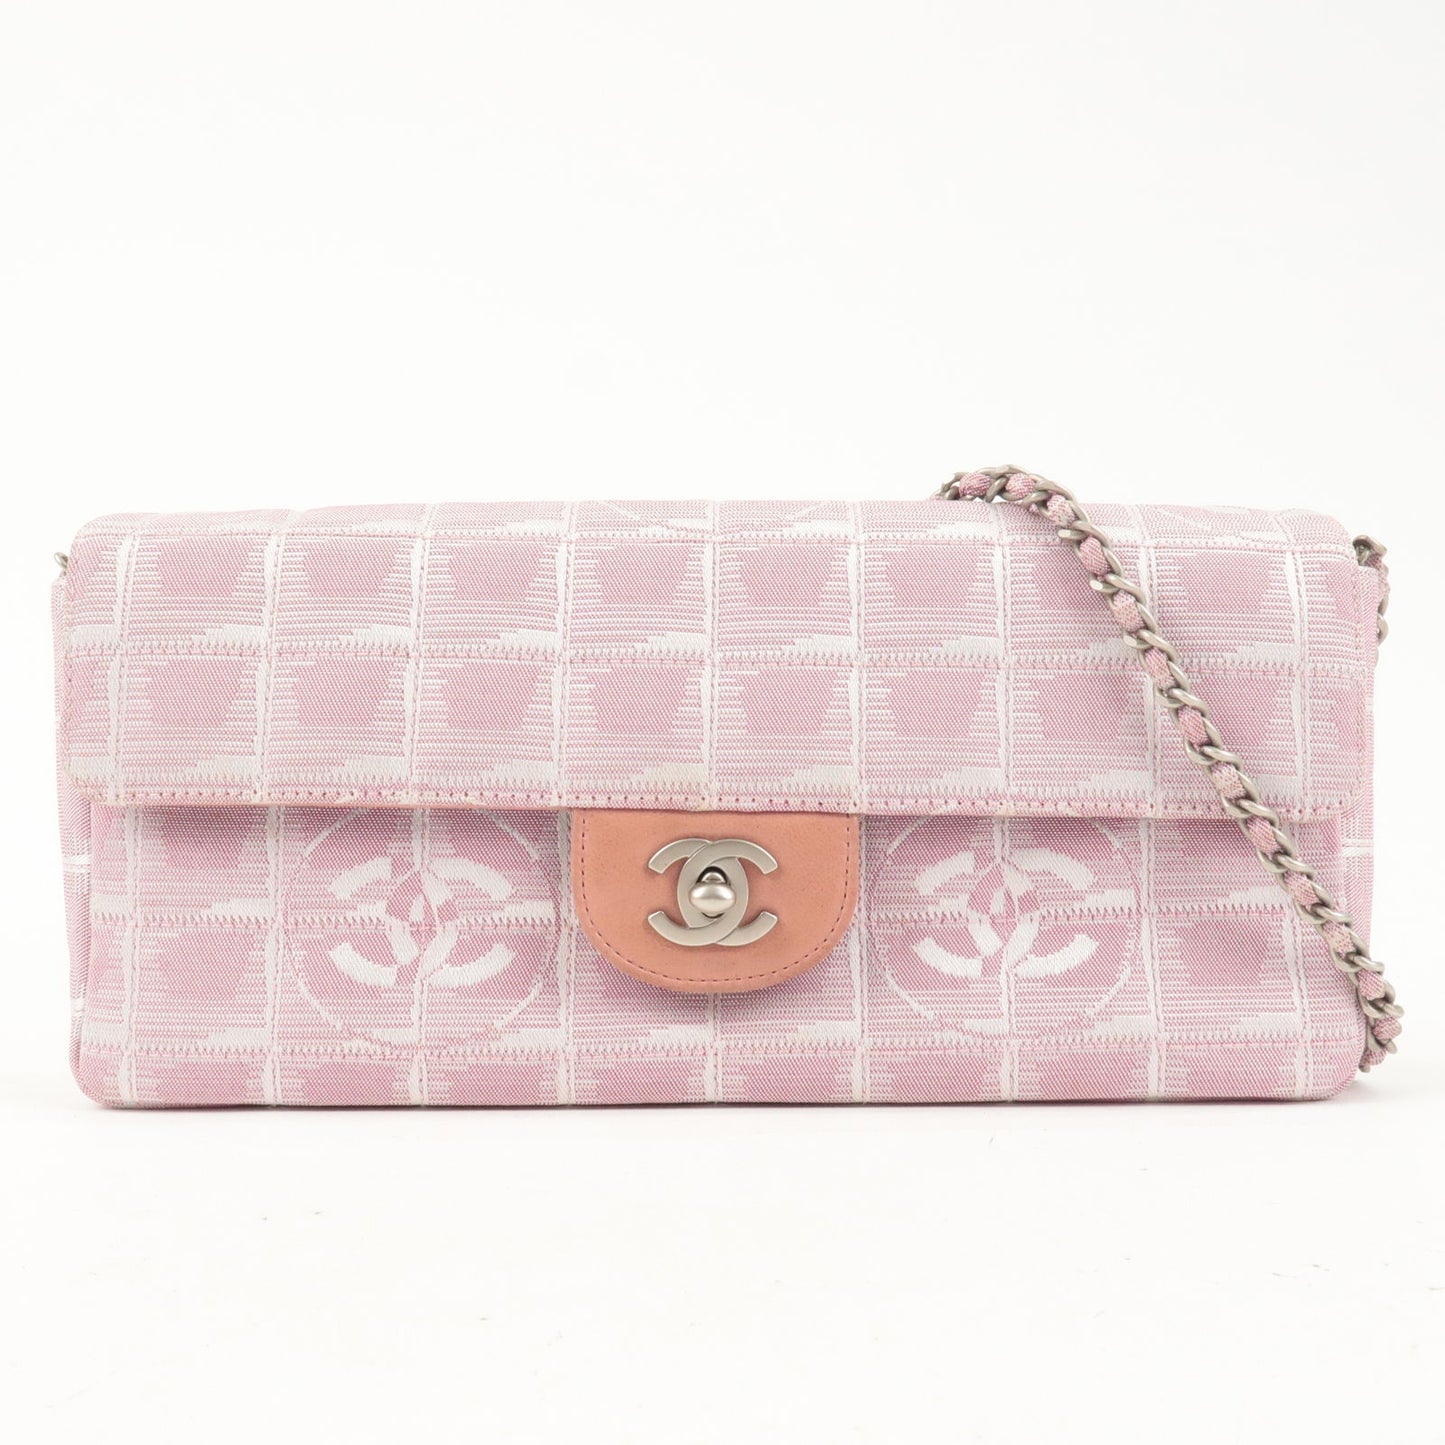 CHANEL-Travel-Line-Nylon-Jacquard-Leather-Chain-Bag-Pink-A15316